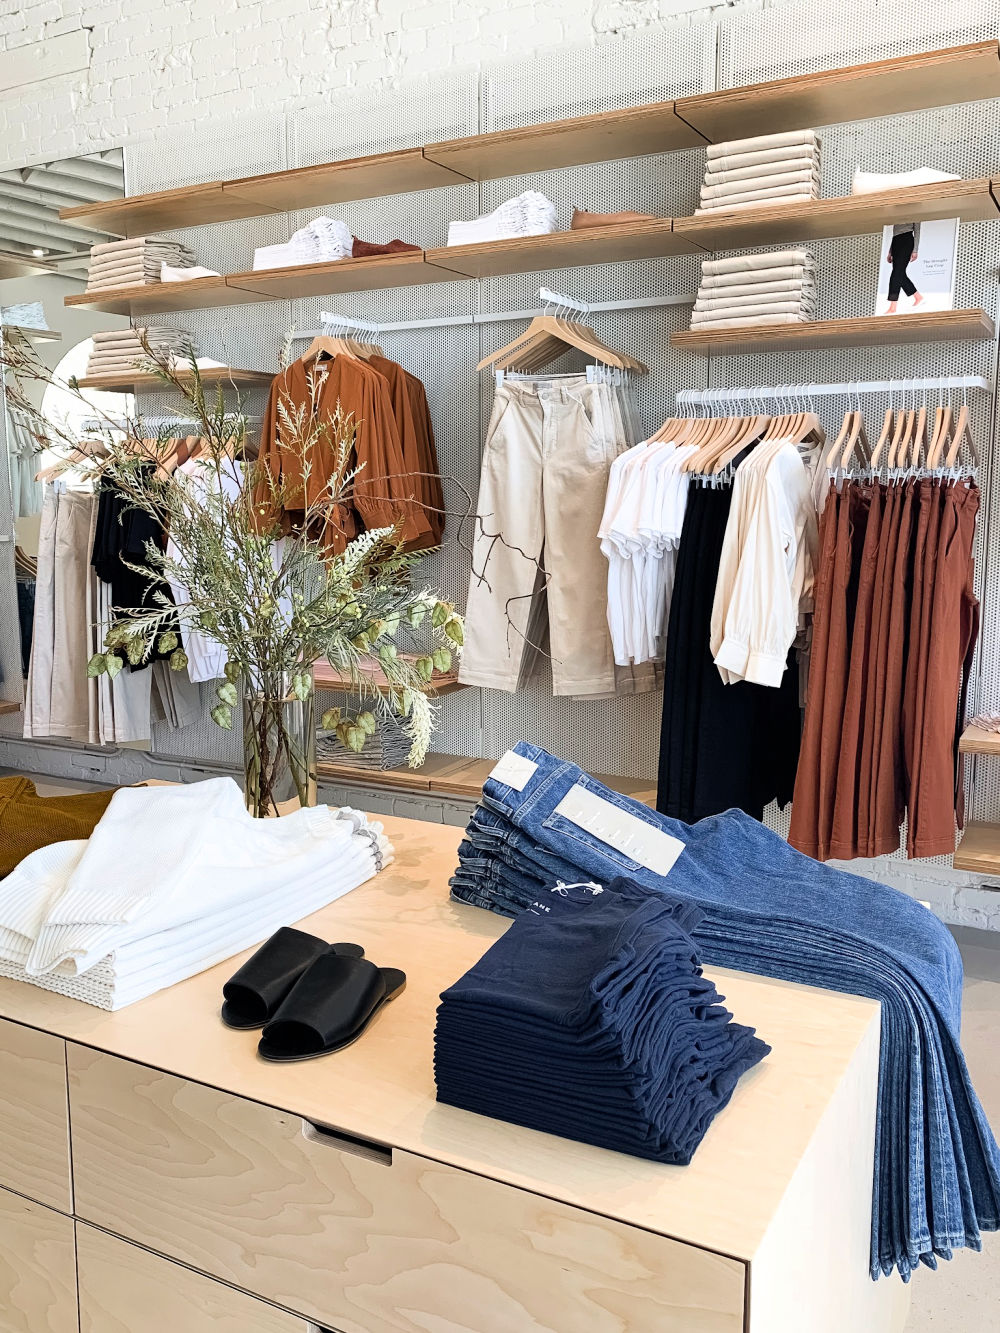 Displays at Everlane store in Venice, CA. Details at une femme d'un certain age.